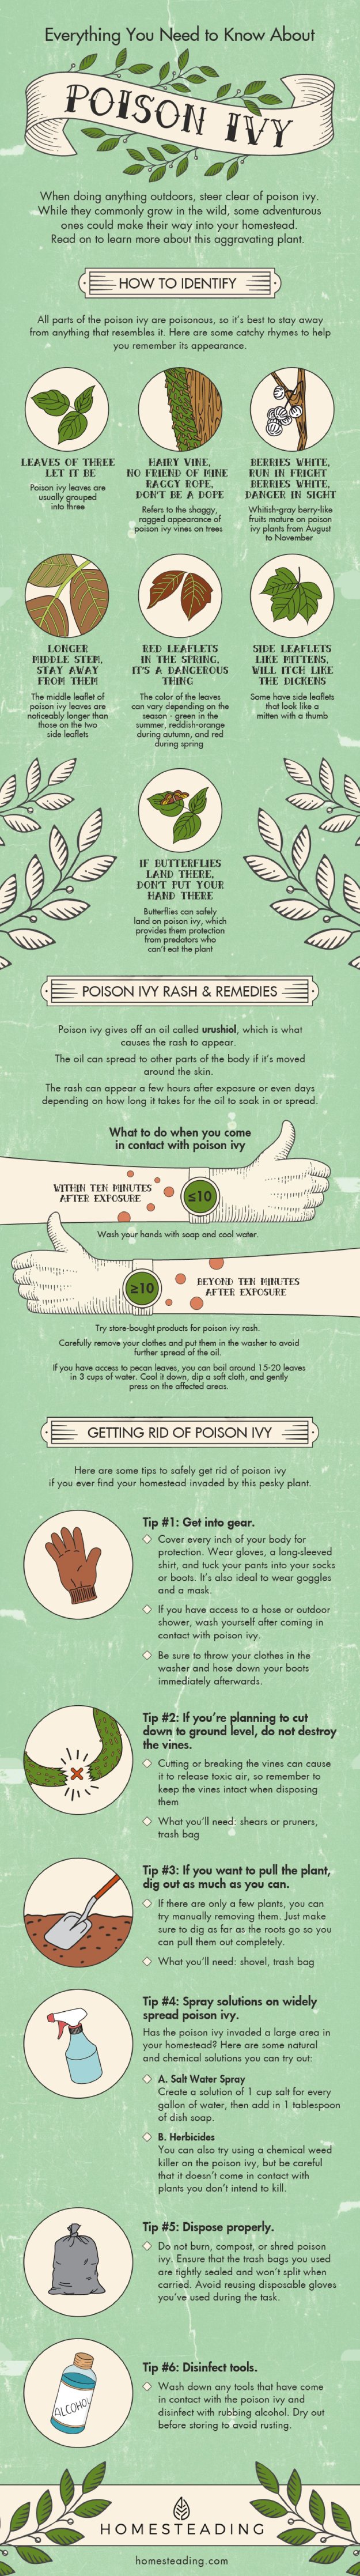 How To Identify Poison Ivy | Homesteading Safety Tips